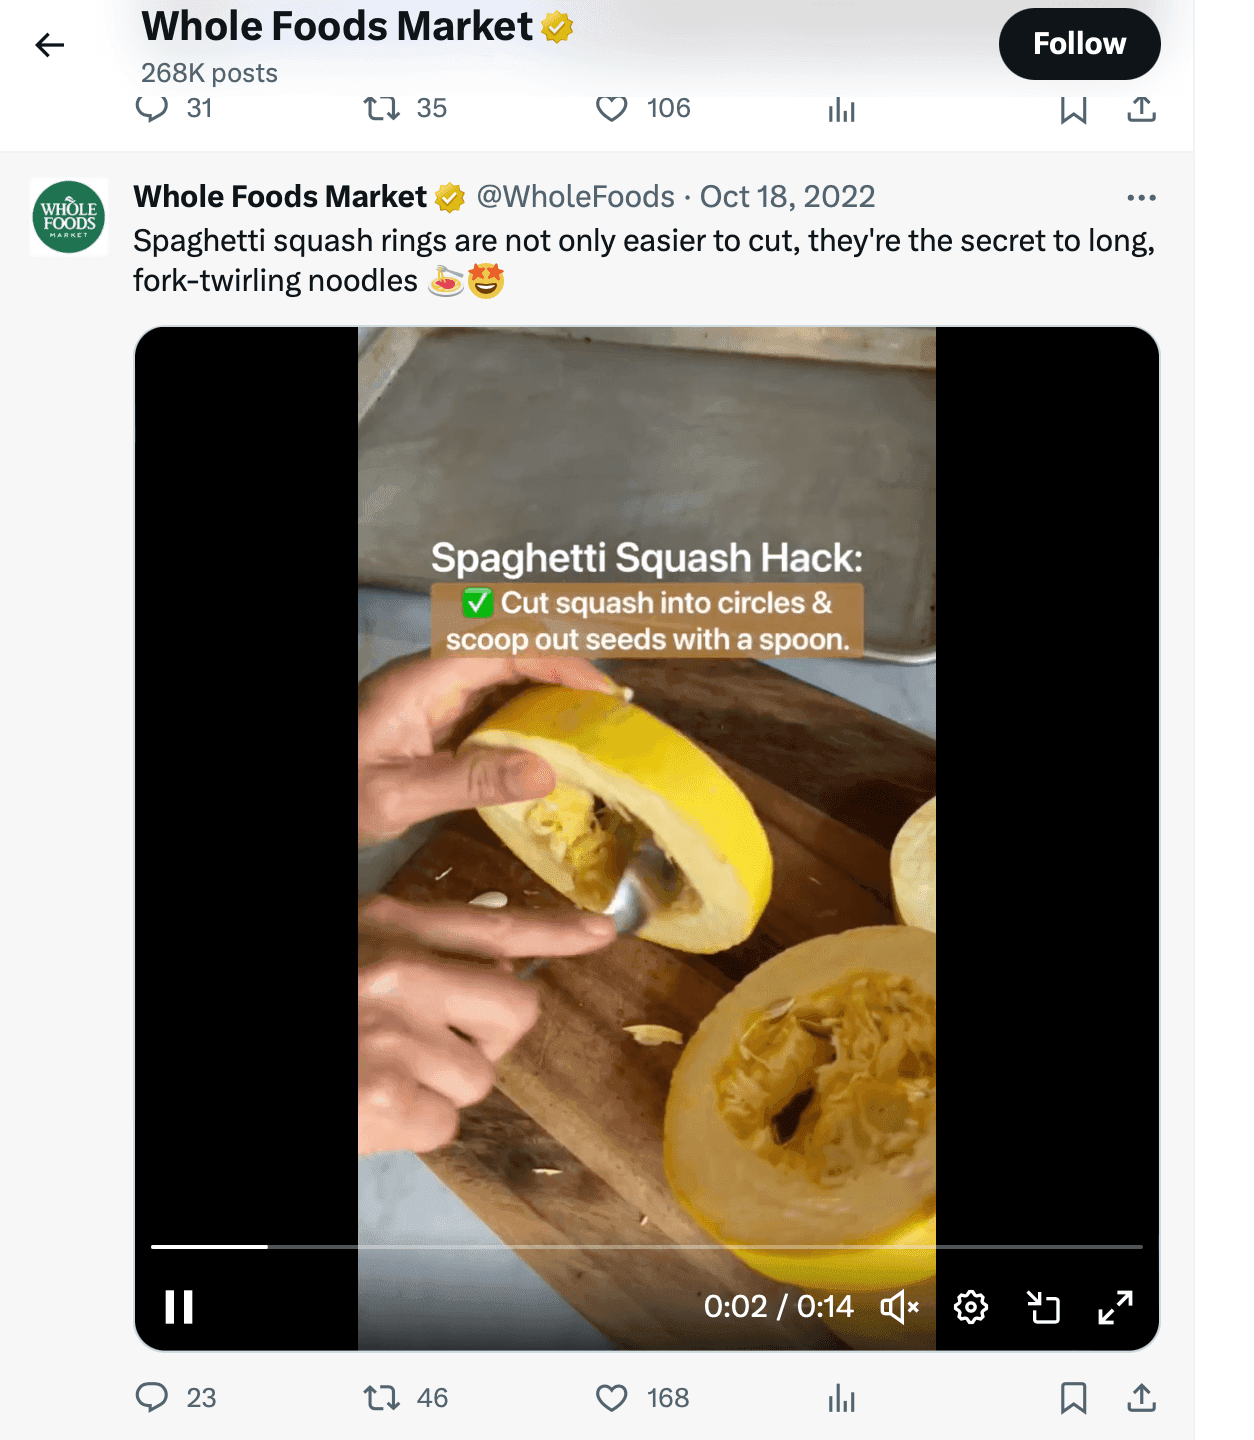 Whole Foods X post about spaghetti squash rings cooking practice